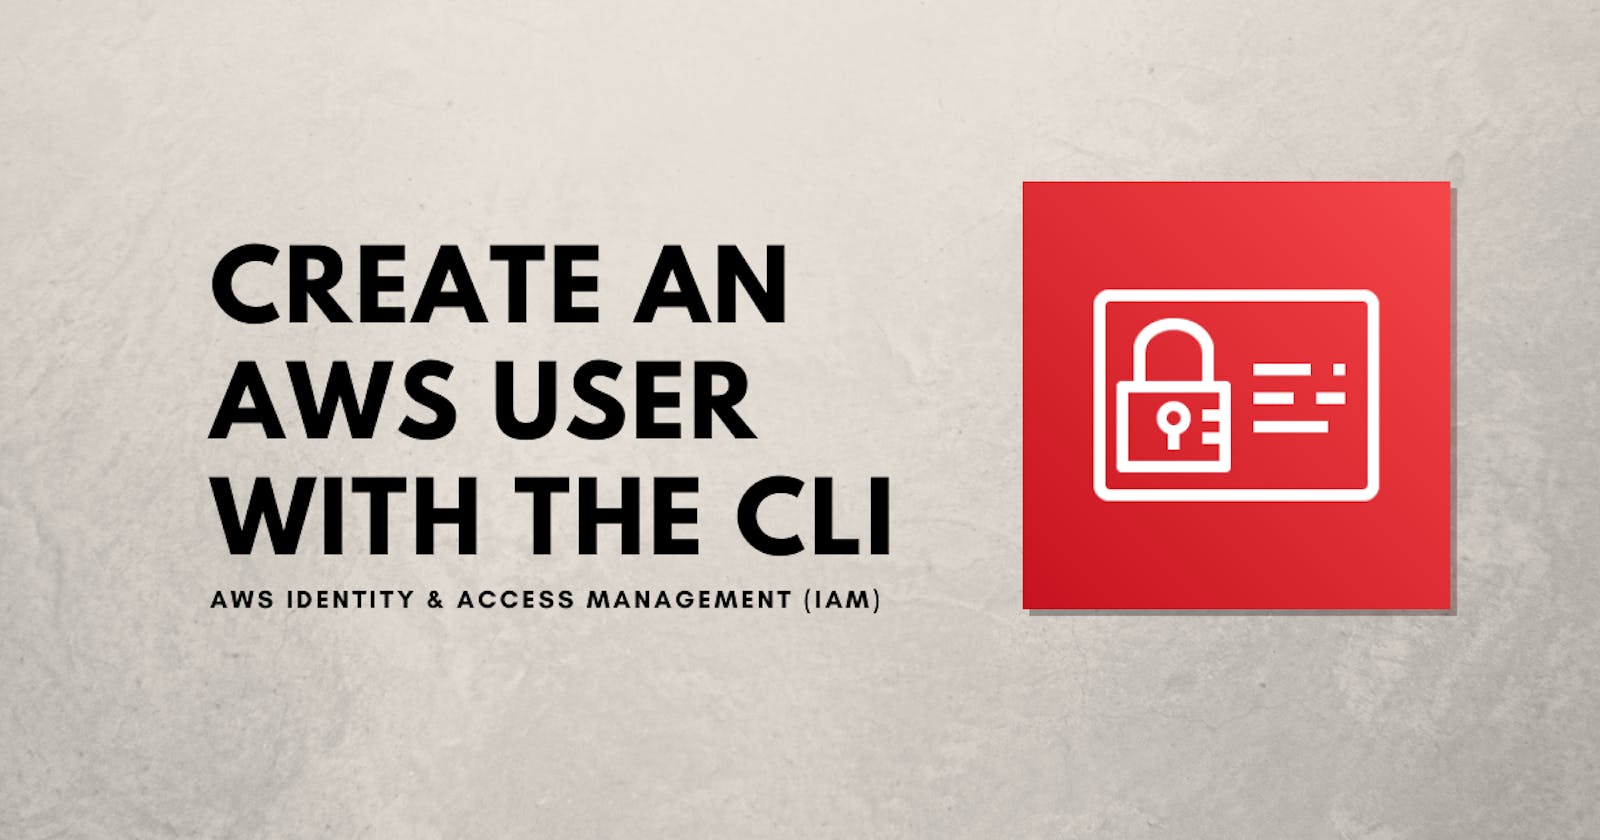 How to create an AWS IAM User with the CLI